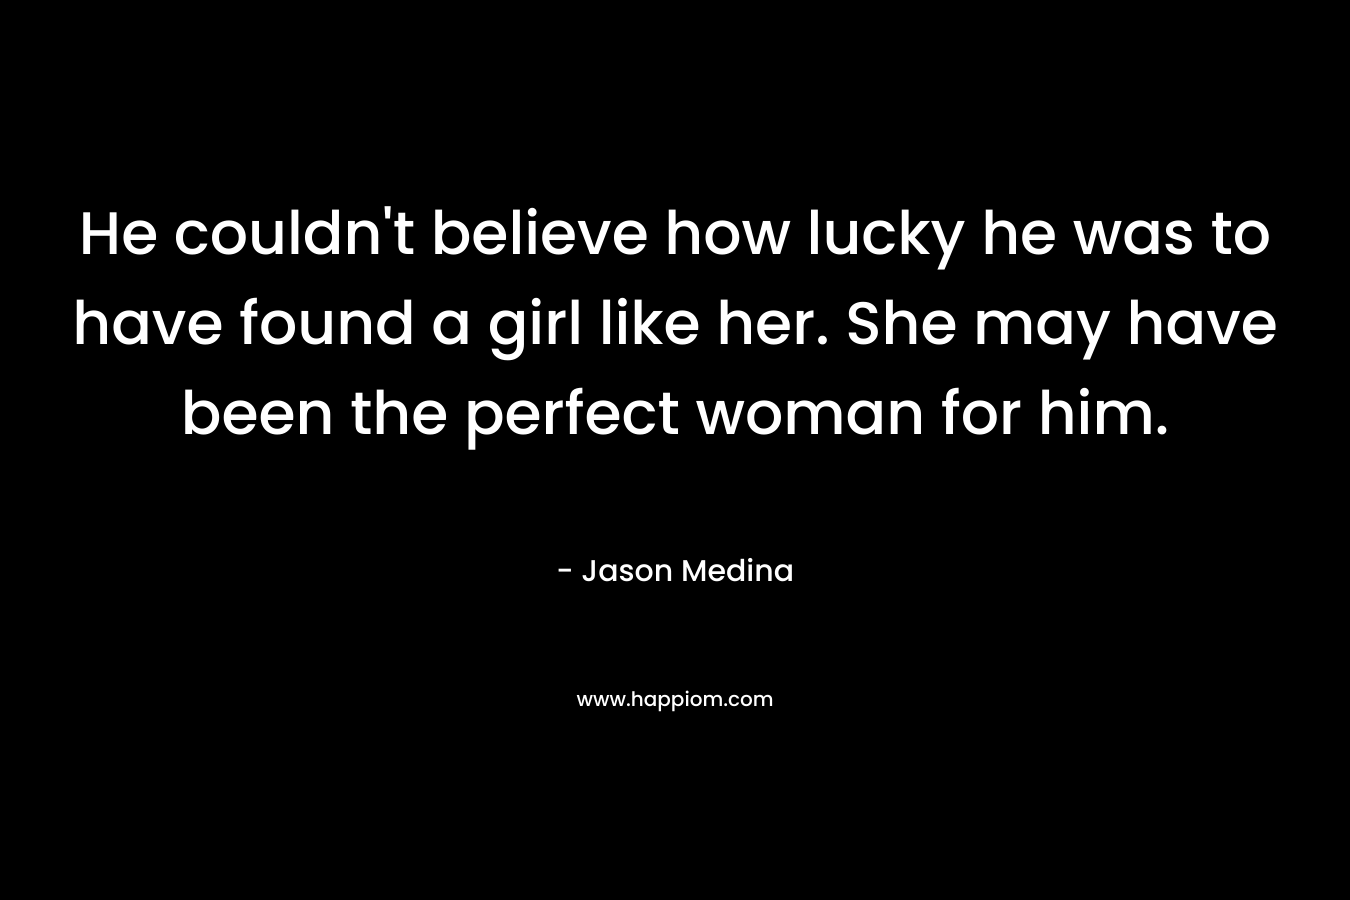 He couldn't believe how lucky he was to have found a girl like her. She may have been the perfect woman for him.